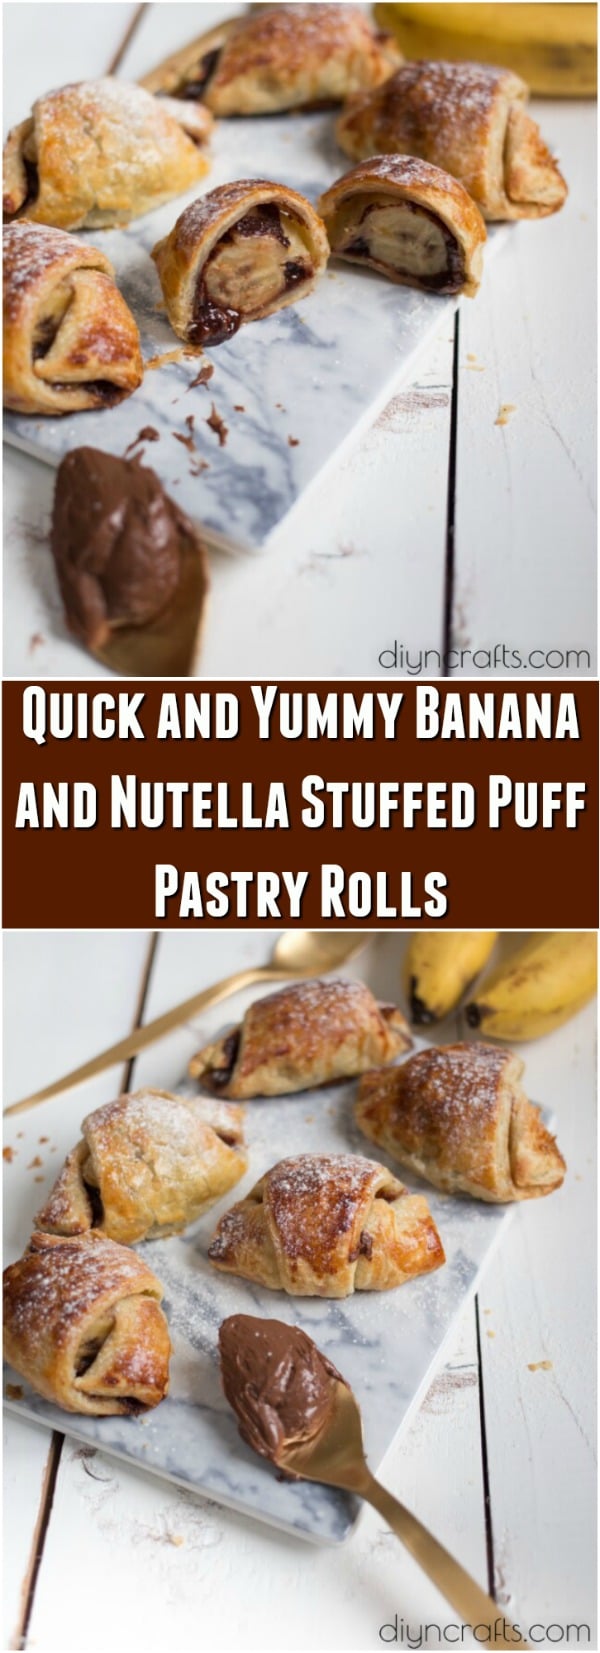 Quick and Yummy Banana and Nutella Stuffed Puff Pastry Rolls